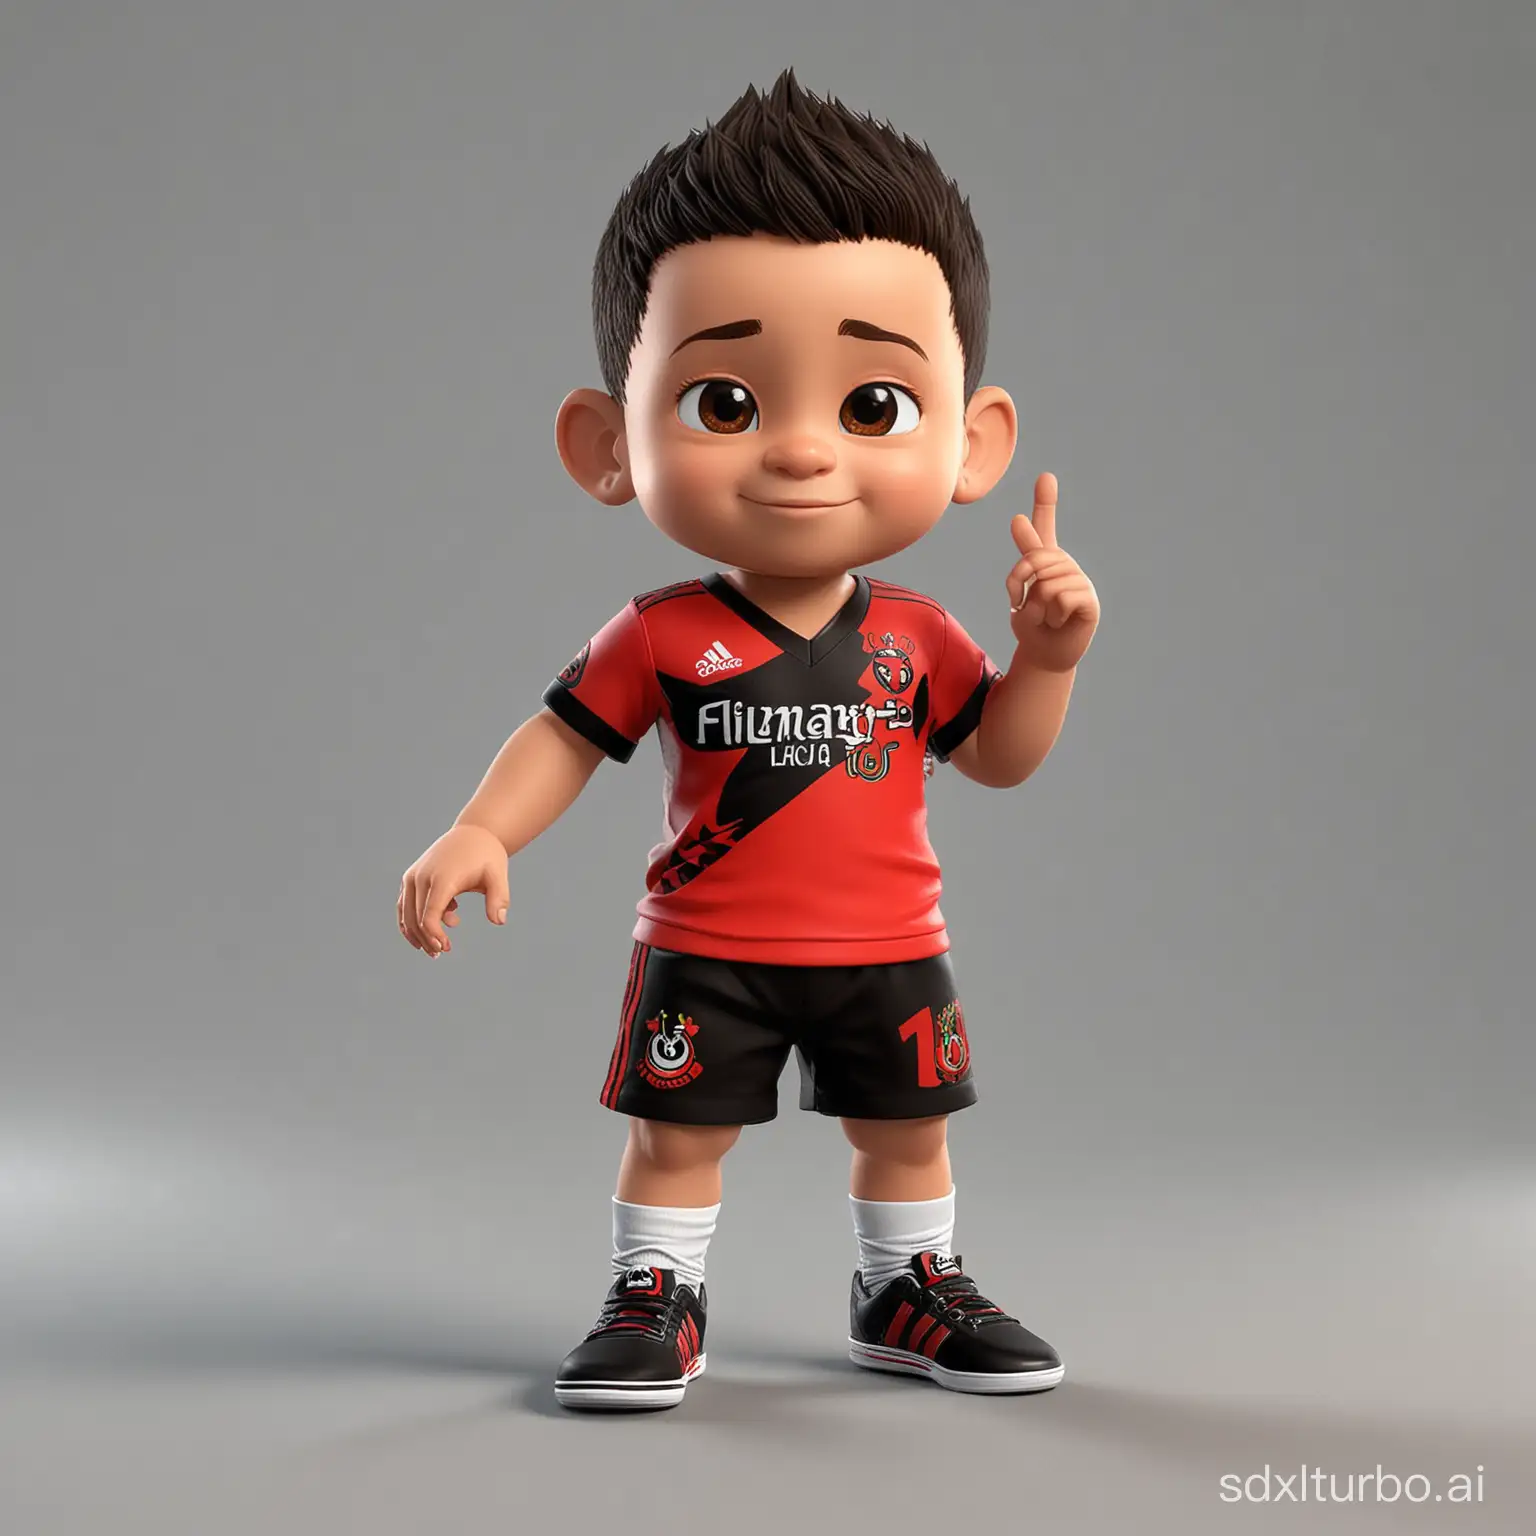 Indonesian-Baby-Boy-Mascot-in-Flamengo-TShirt-and-Shoes